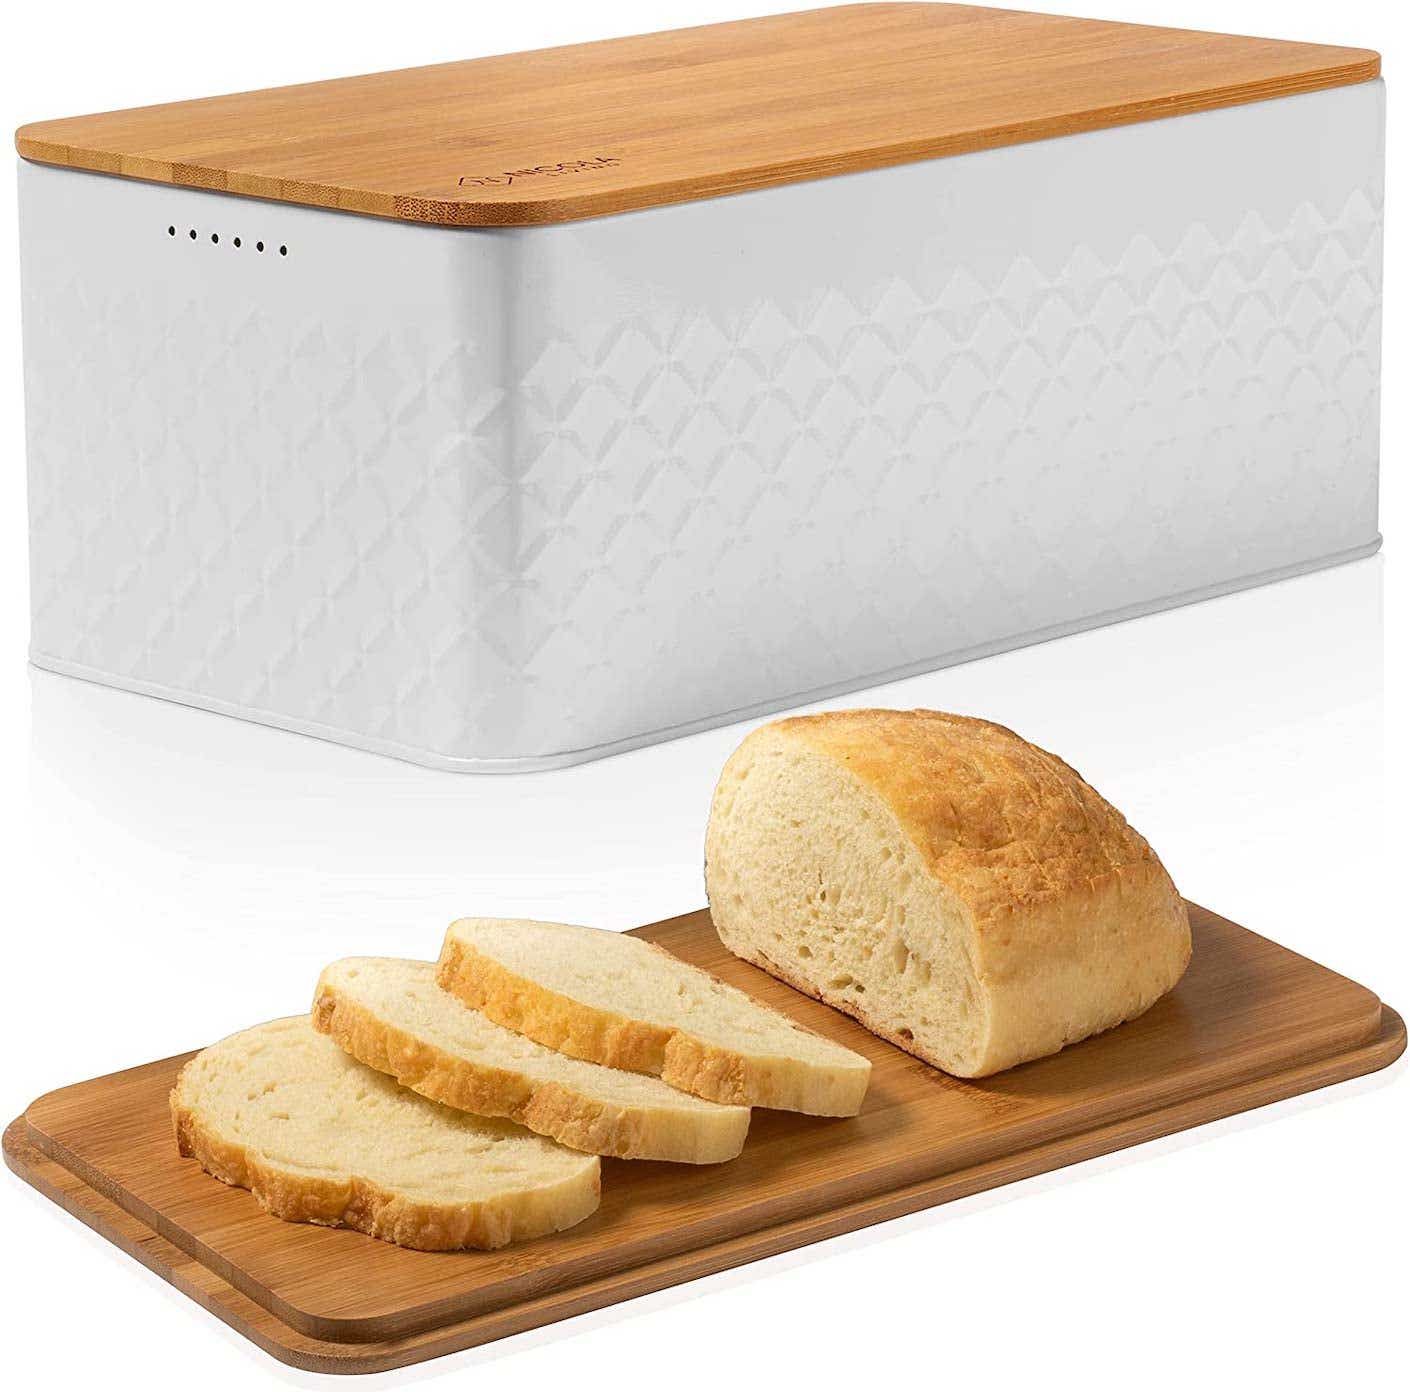 A loaf of bread rests on the wooden cutting board that doubles as a lid for a white metal bread box that sits in the background.